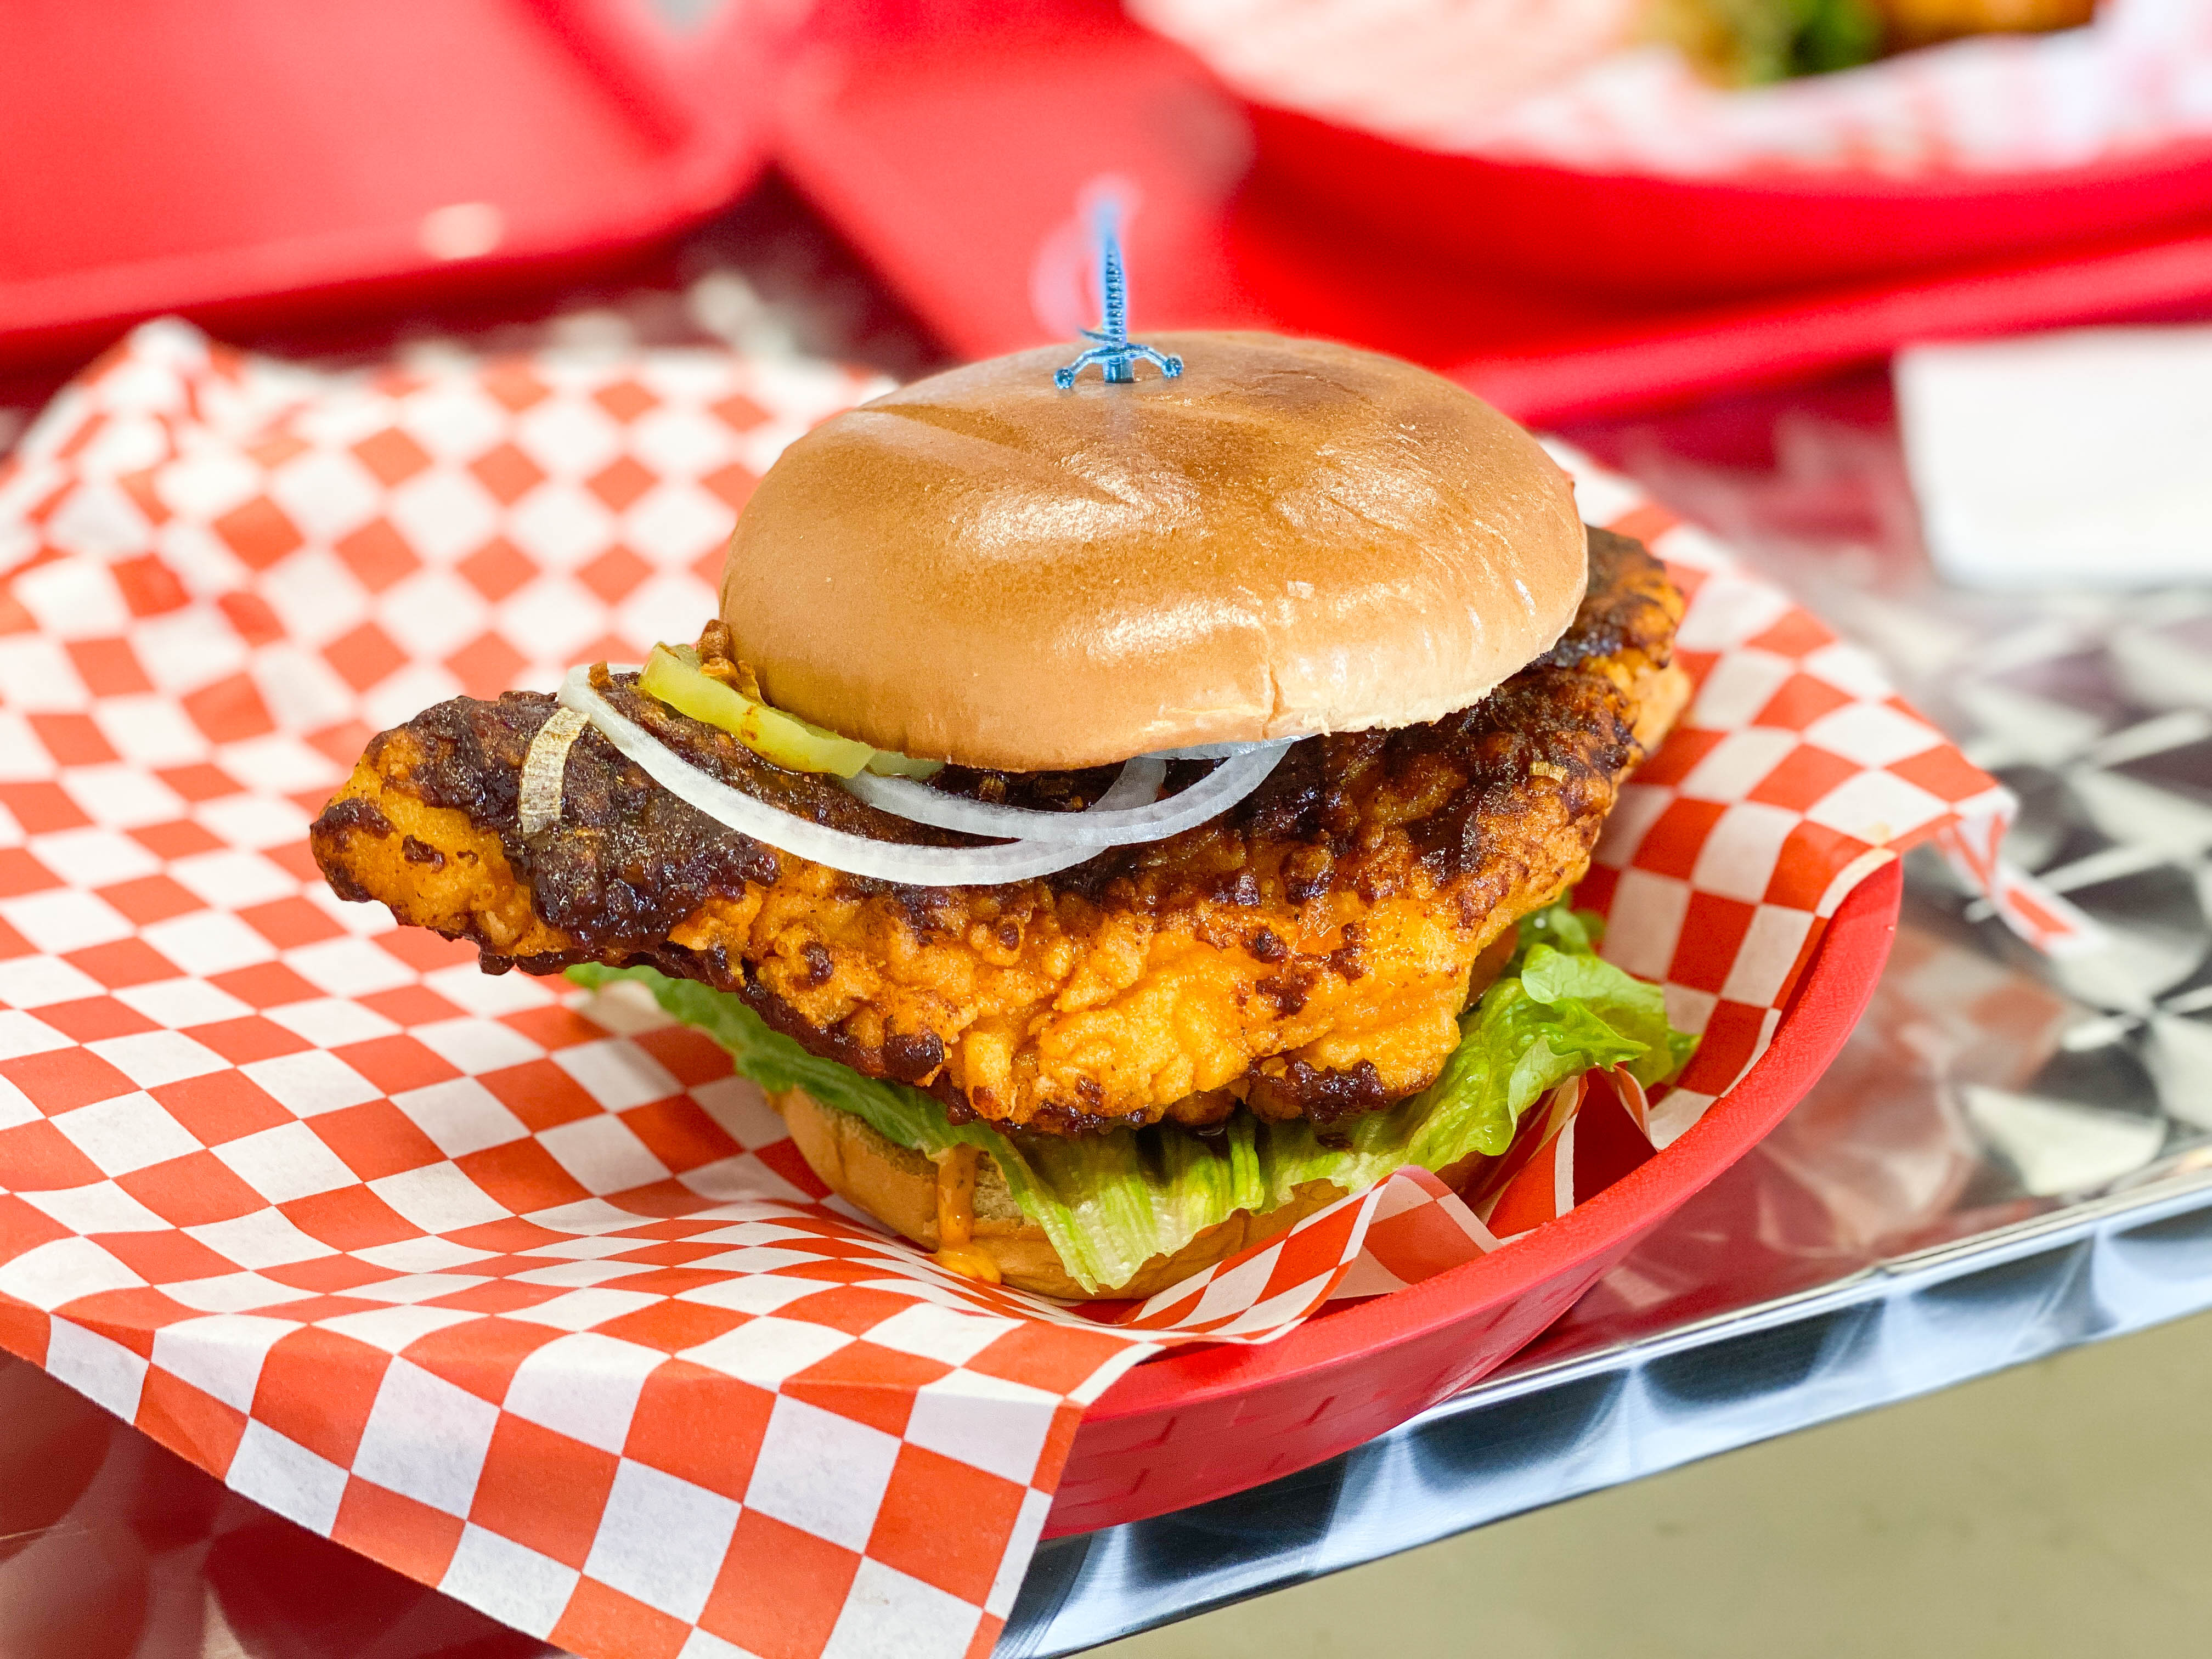 A fried chicken sandwich on red checkered paper at daytime.